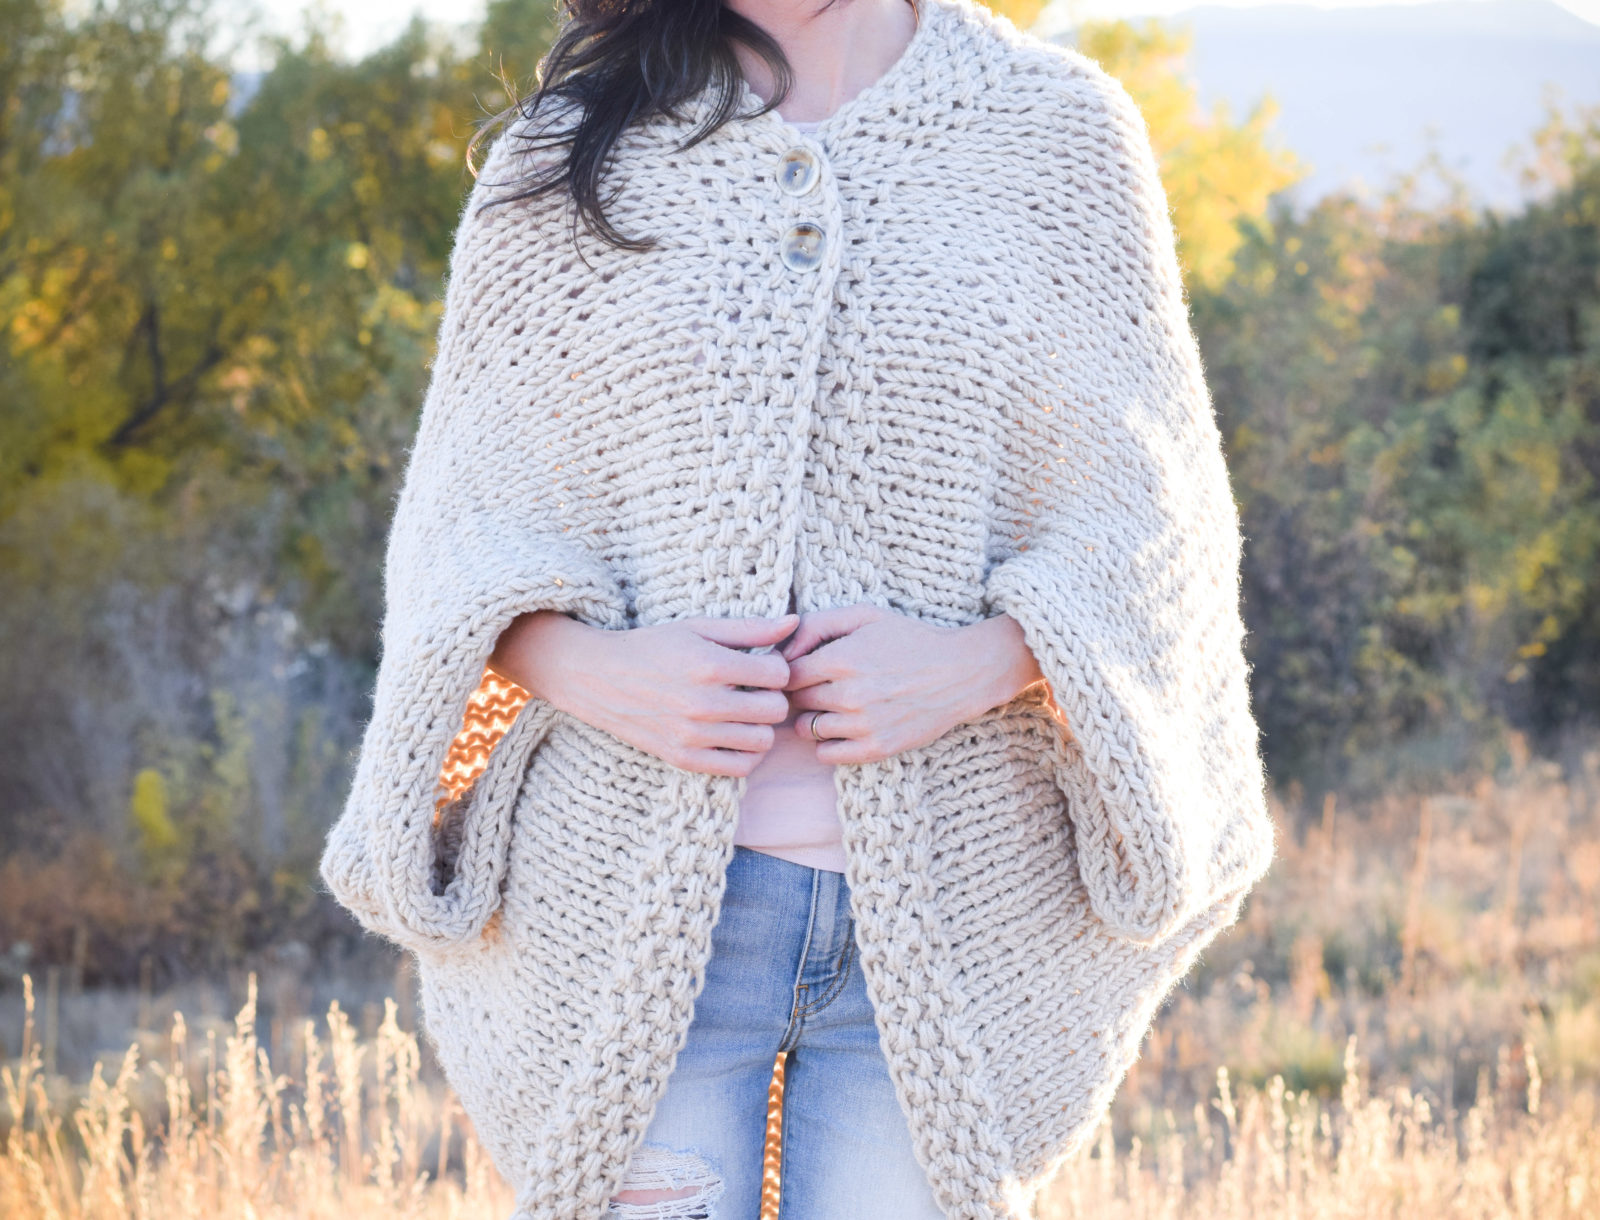 Top Knit and Crochet Patterns – Mama In A Stitch